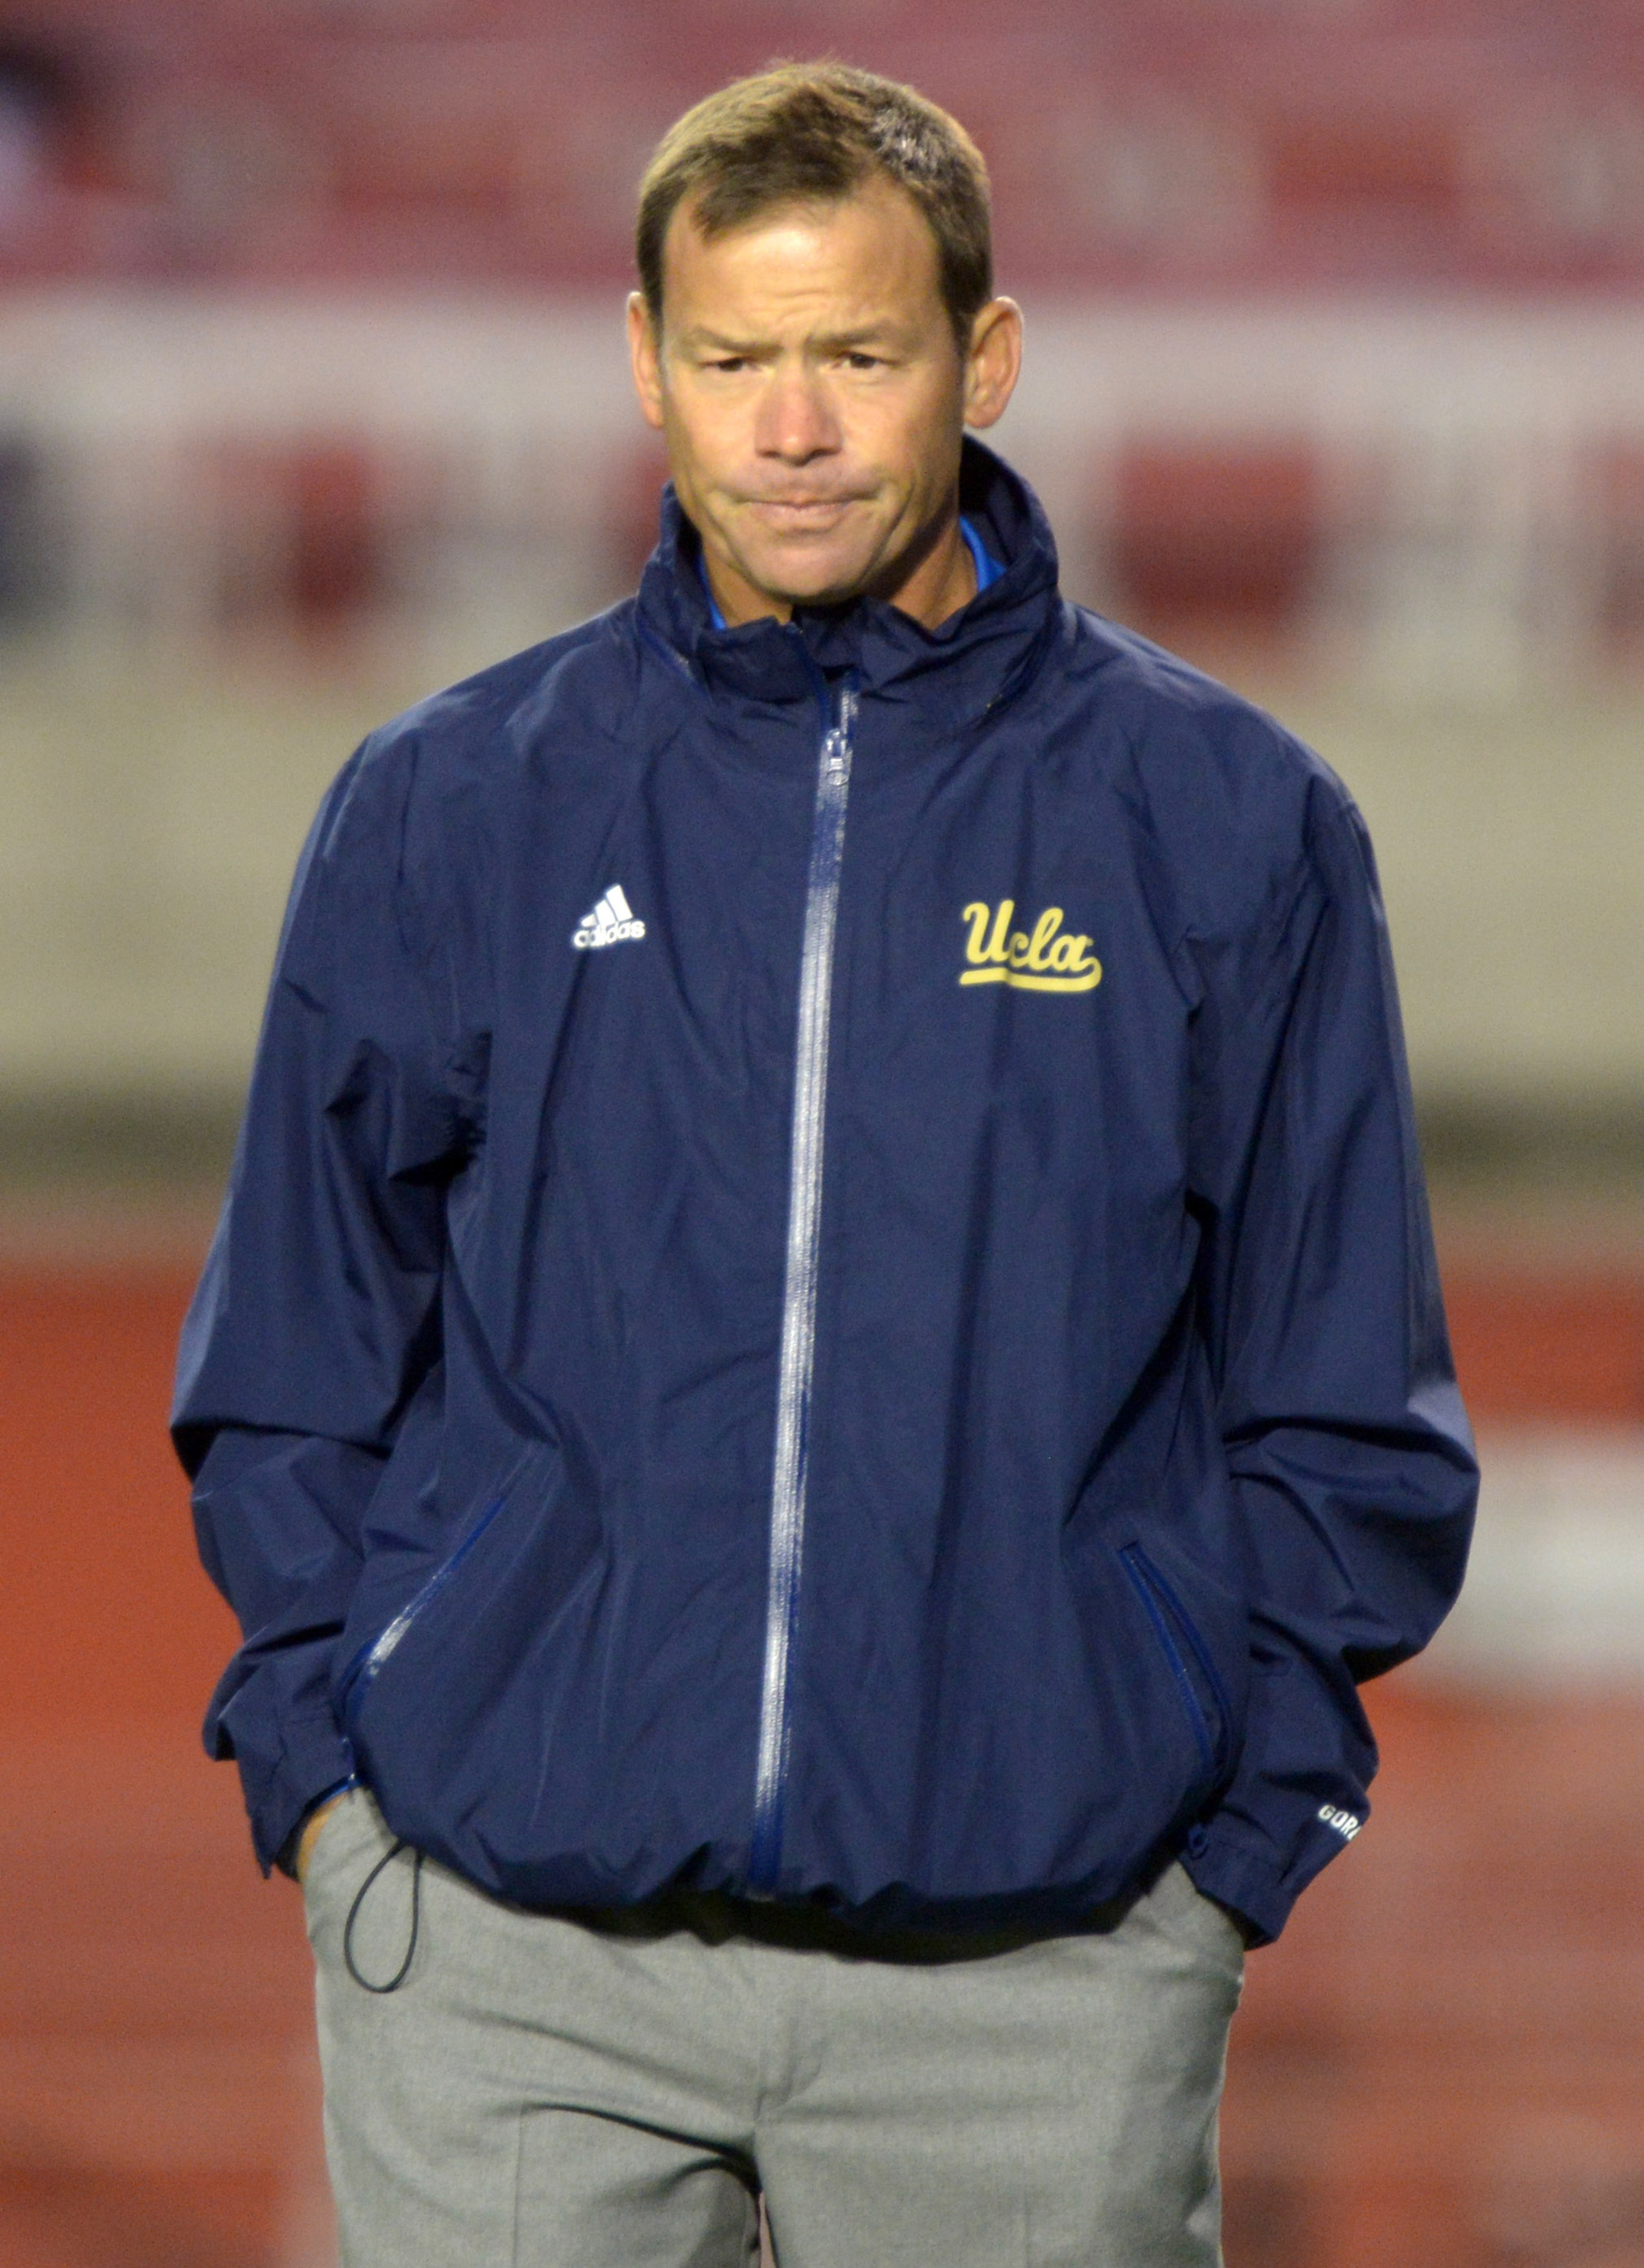 Coach Jim Mora is wearing his game face already this week.